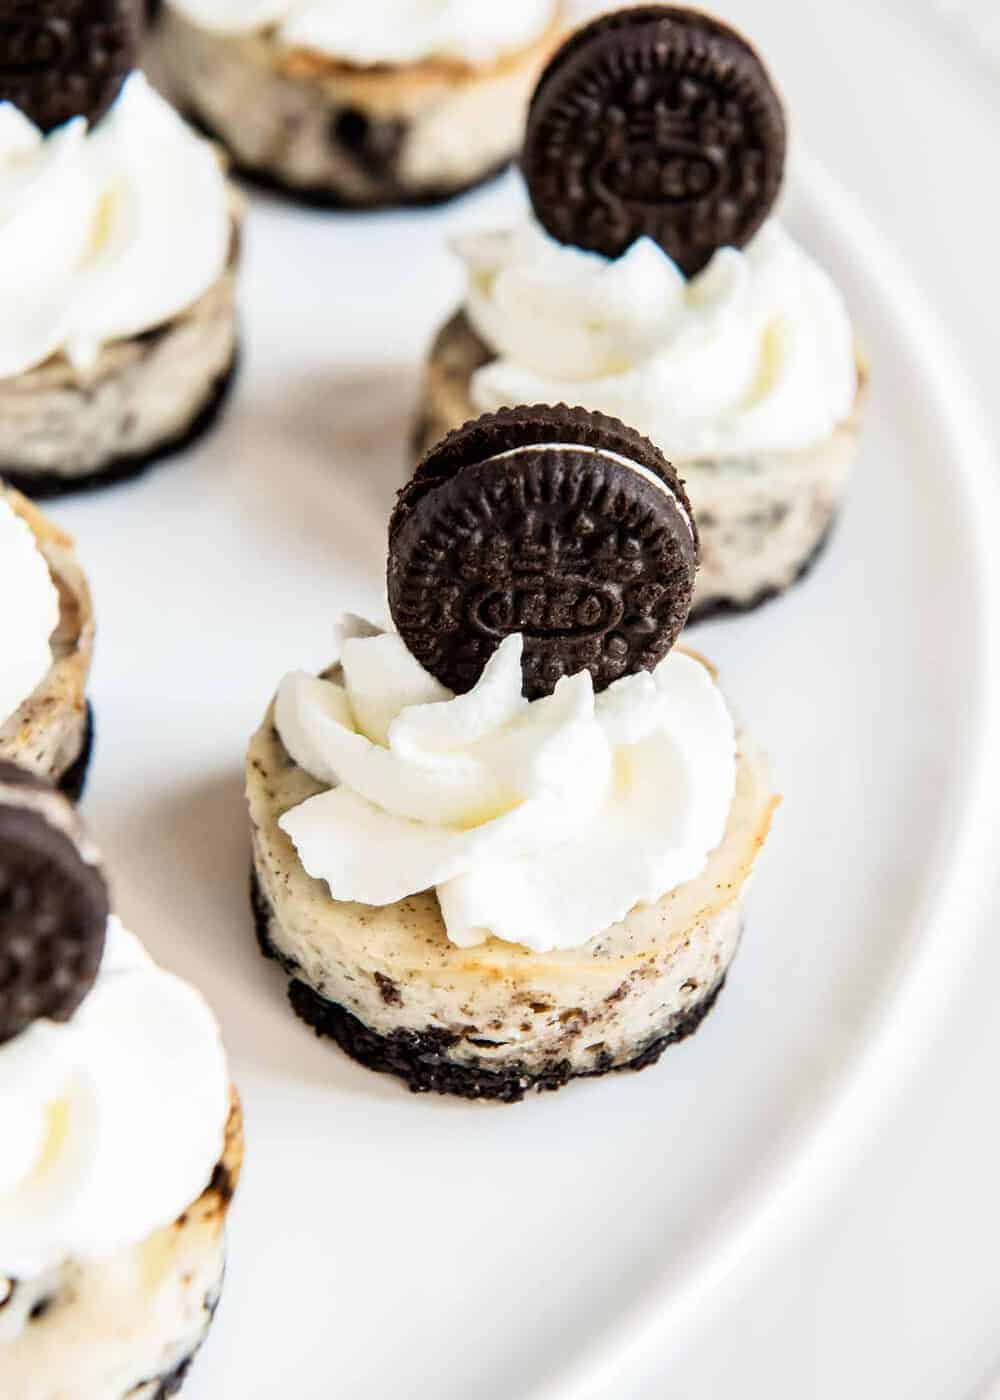 Mini cheesecakes with Oreo crust on white plate.